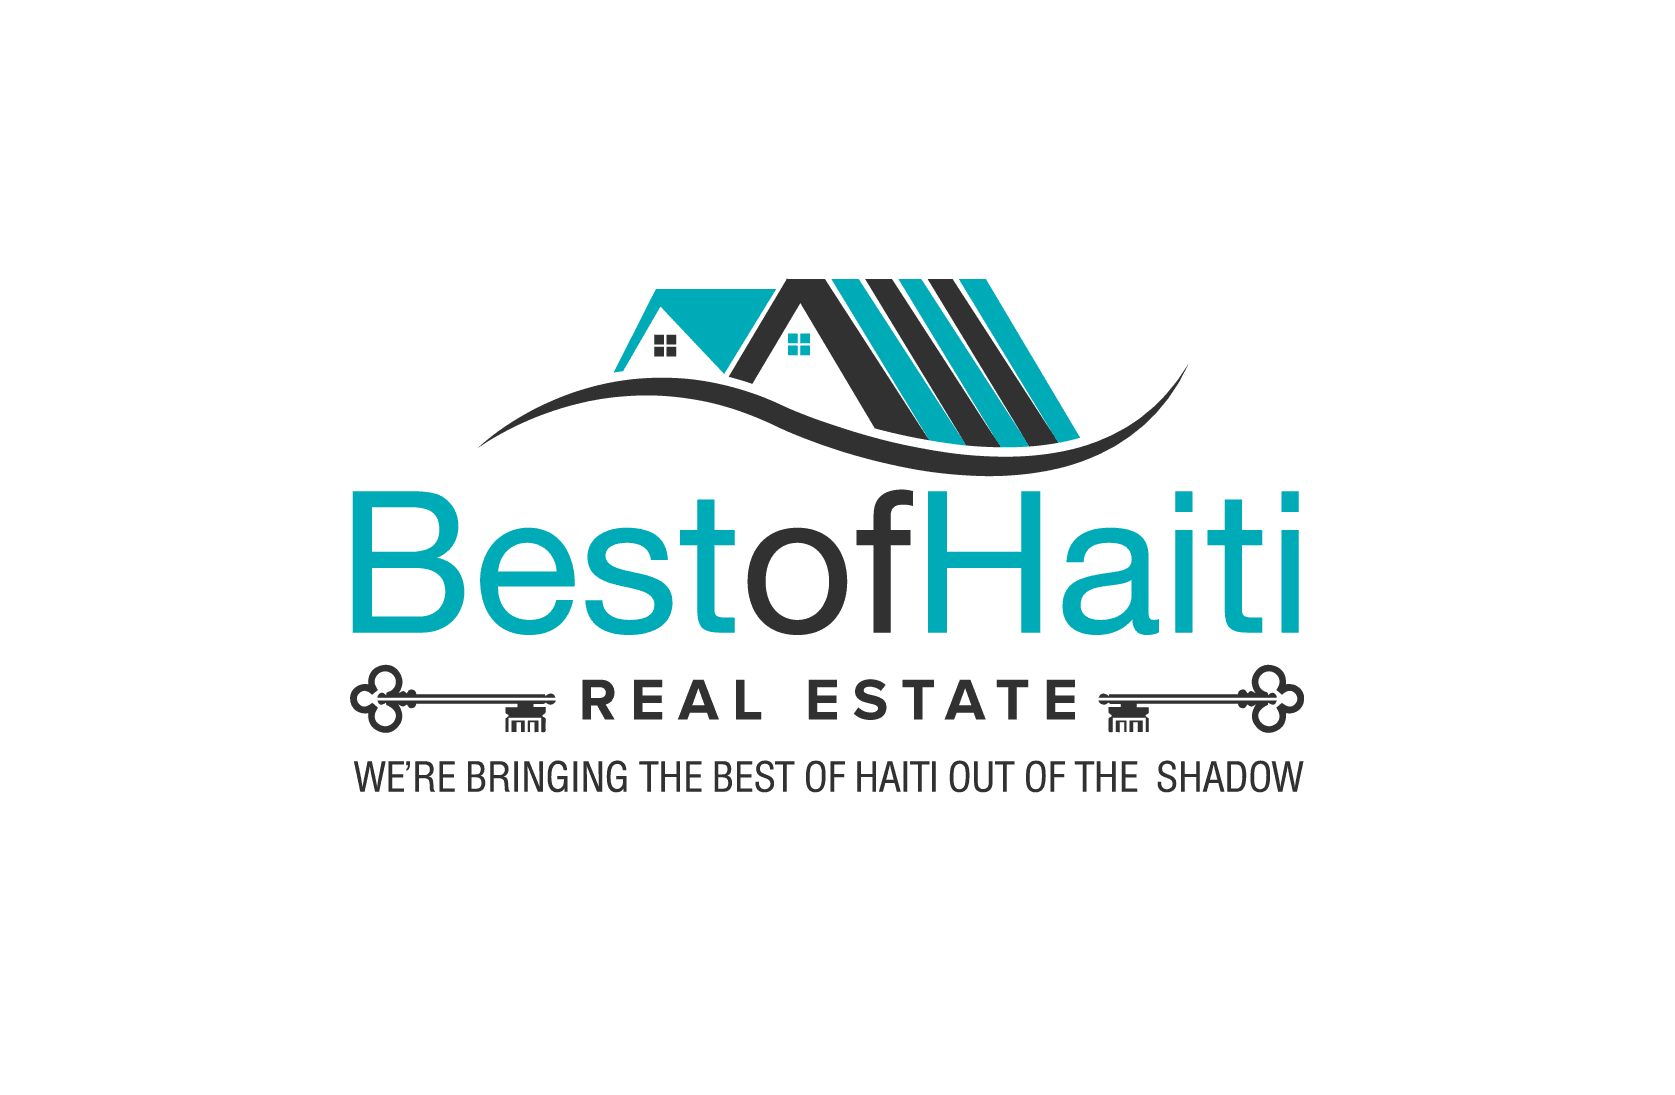 Modern 2 Bedrooms, 2 Bathrooms Furnished House for Rent in Bellevue, Petion-Ville, Haiti (Exclusive Village)